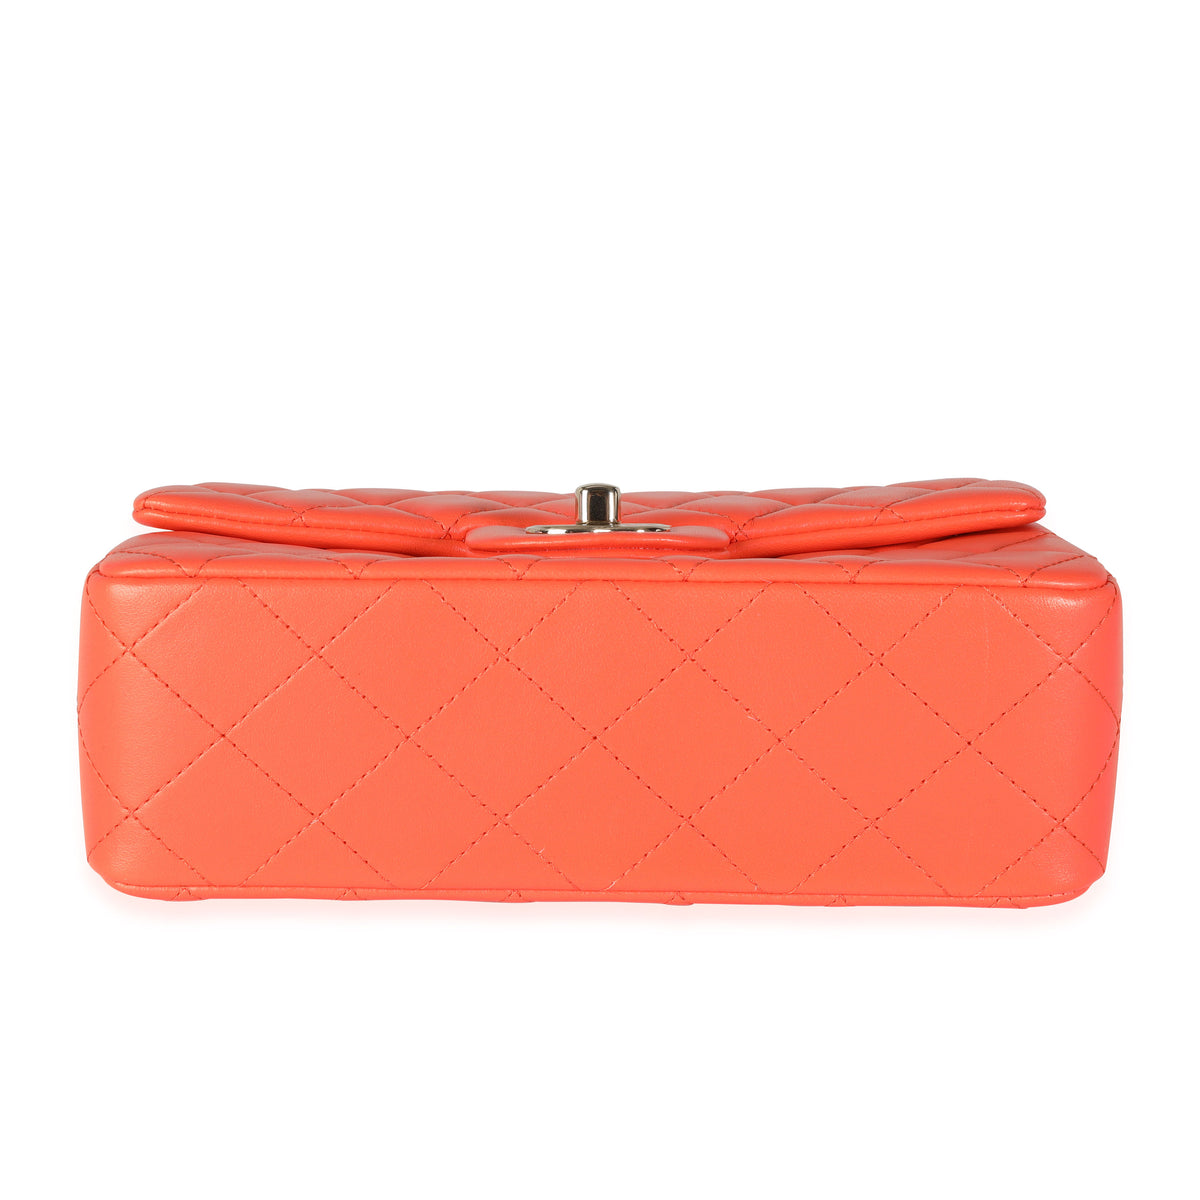 Chanel Orange Quilted Patent Leather Jumbo Double Flap Bag, myGemma, JP